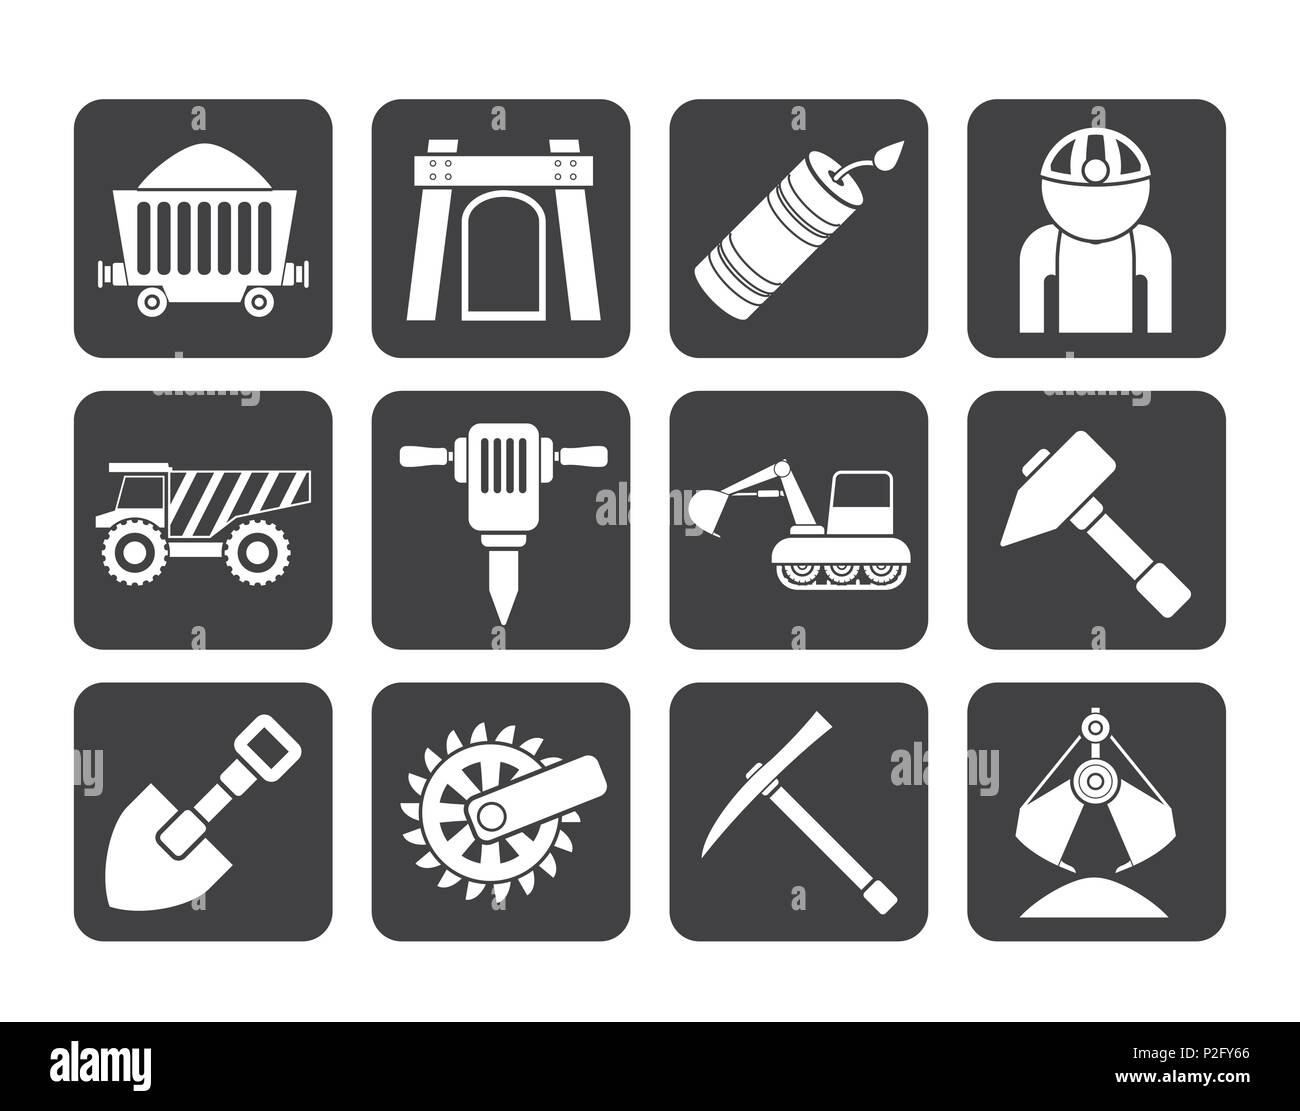 Silhouette Mining and quarrying industry objects and icons - vector icon set Stock Vector